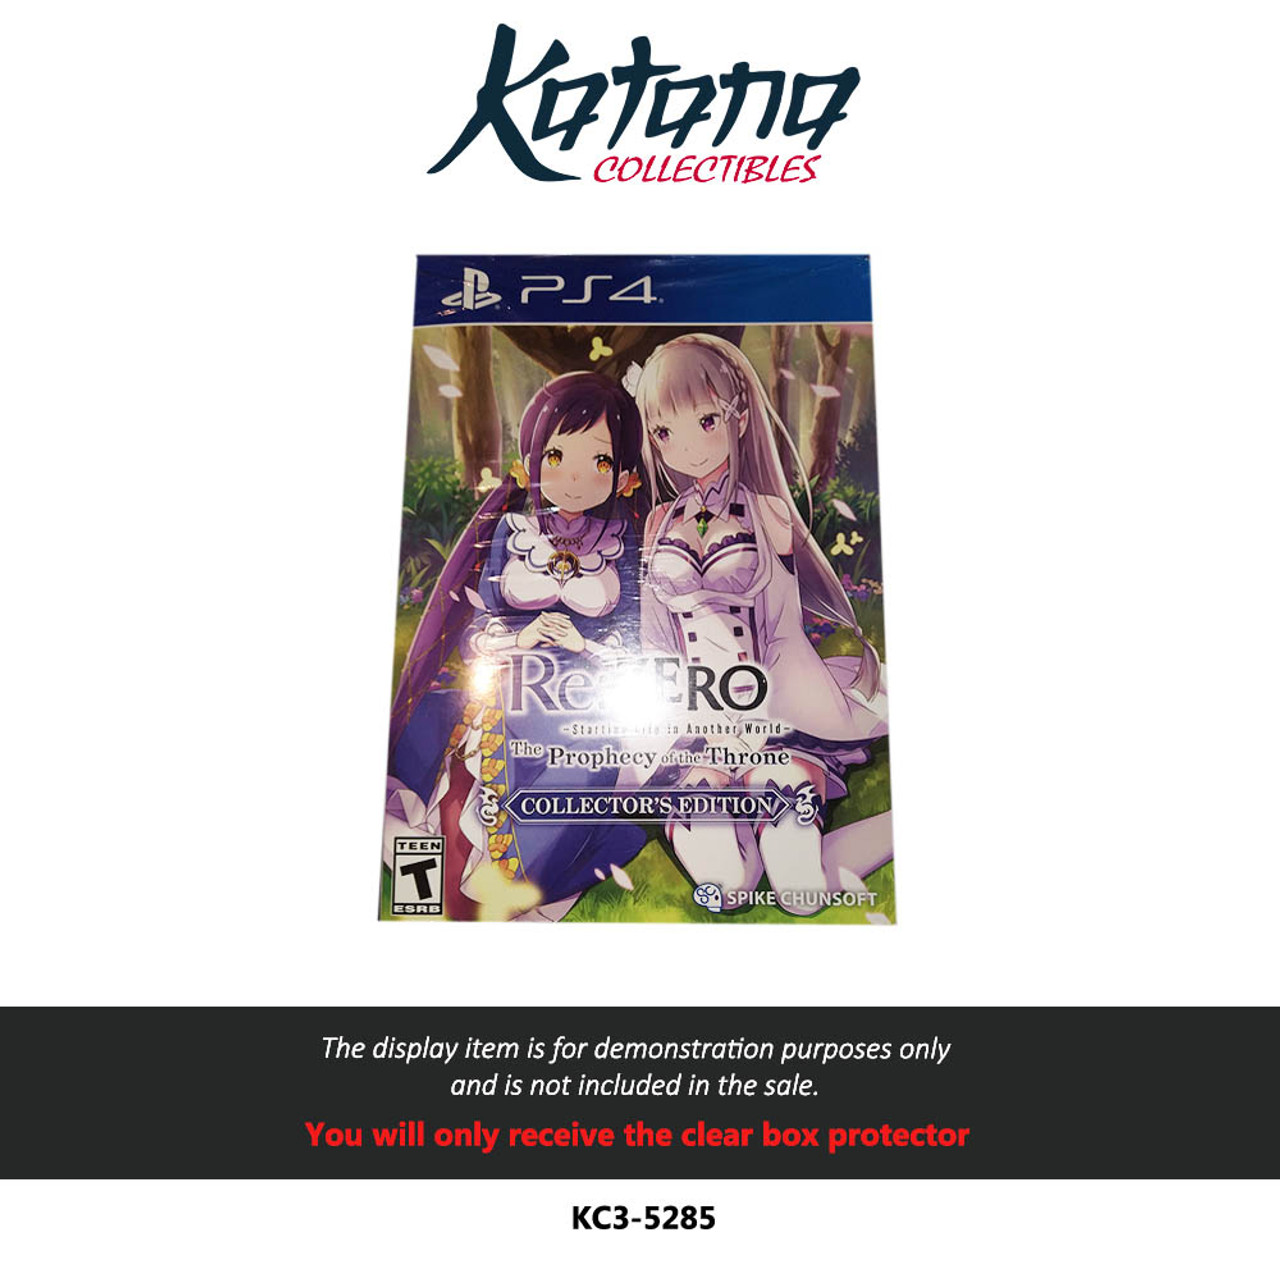 Katana Collectibles Protector For PS4 Re:Zero The Prophecy of the Throne Collector's Edition